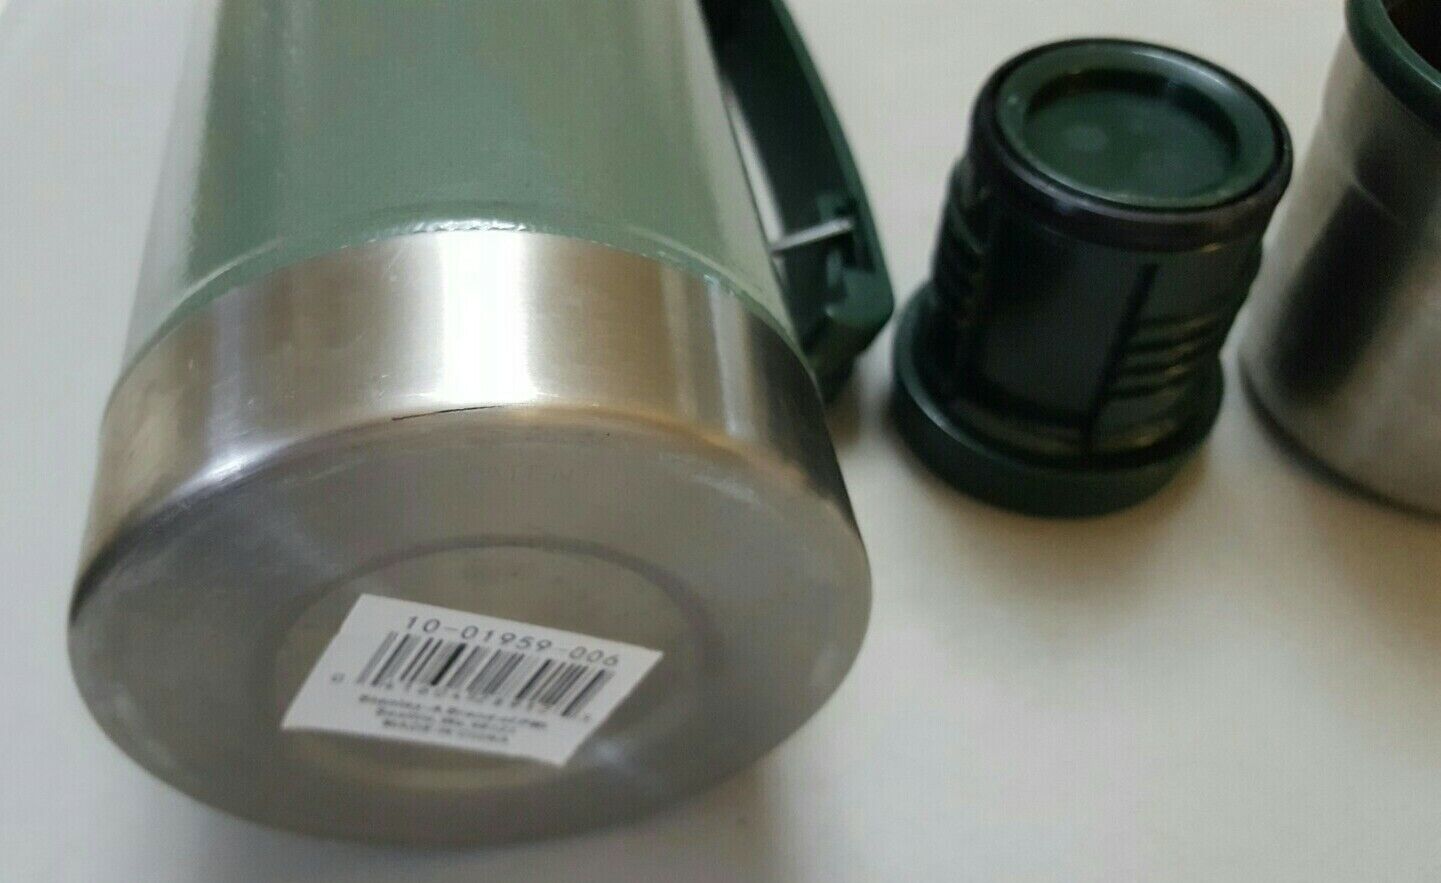 Stanley 1.1 Qt Green Aladdin Thermos Stainless Steel Bottle Hot Cold Cup 32  oz